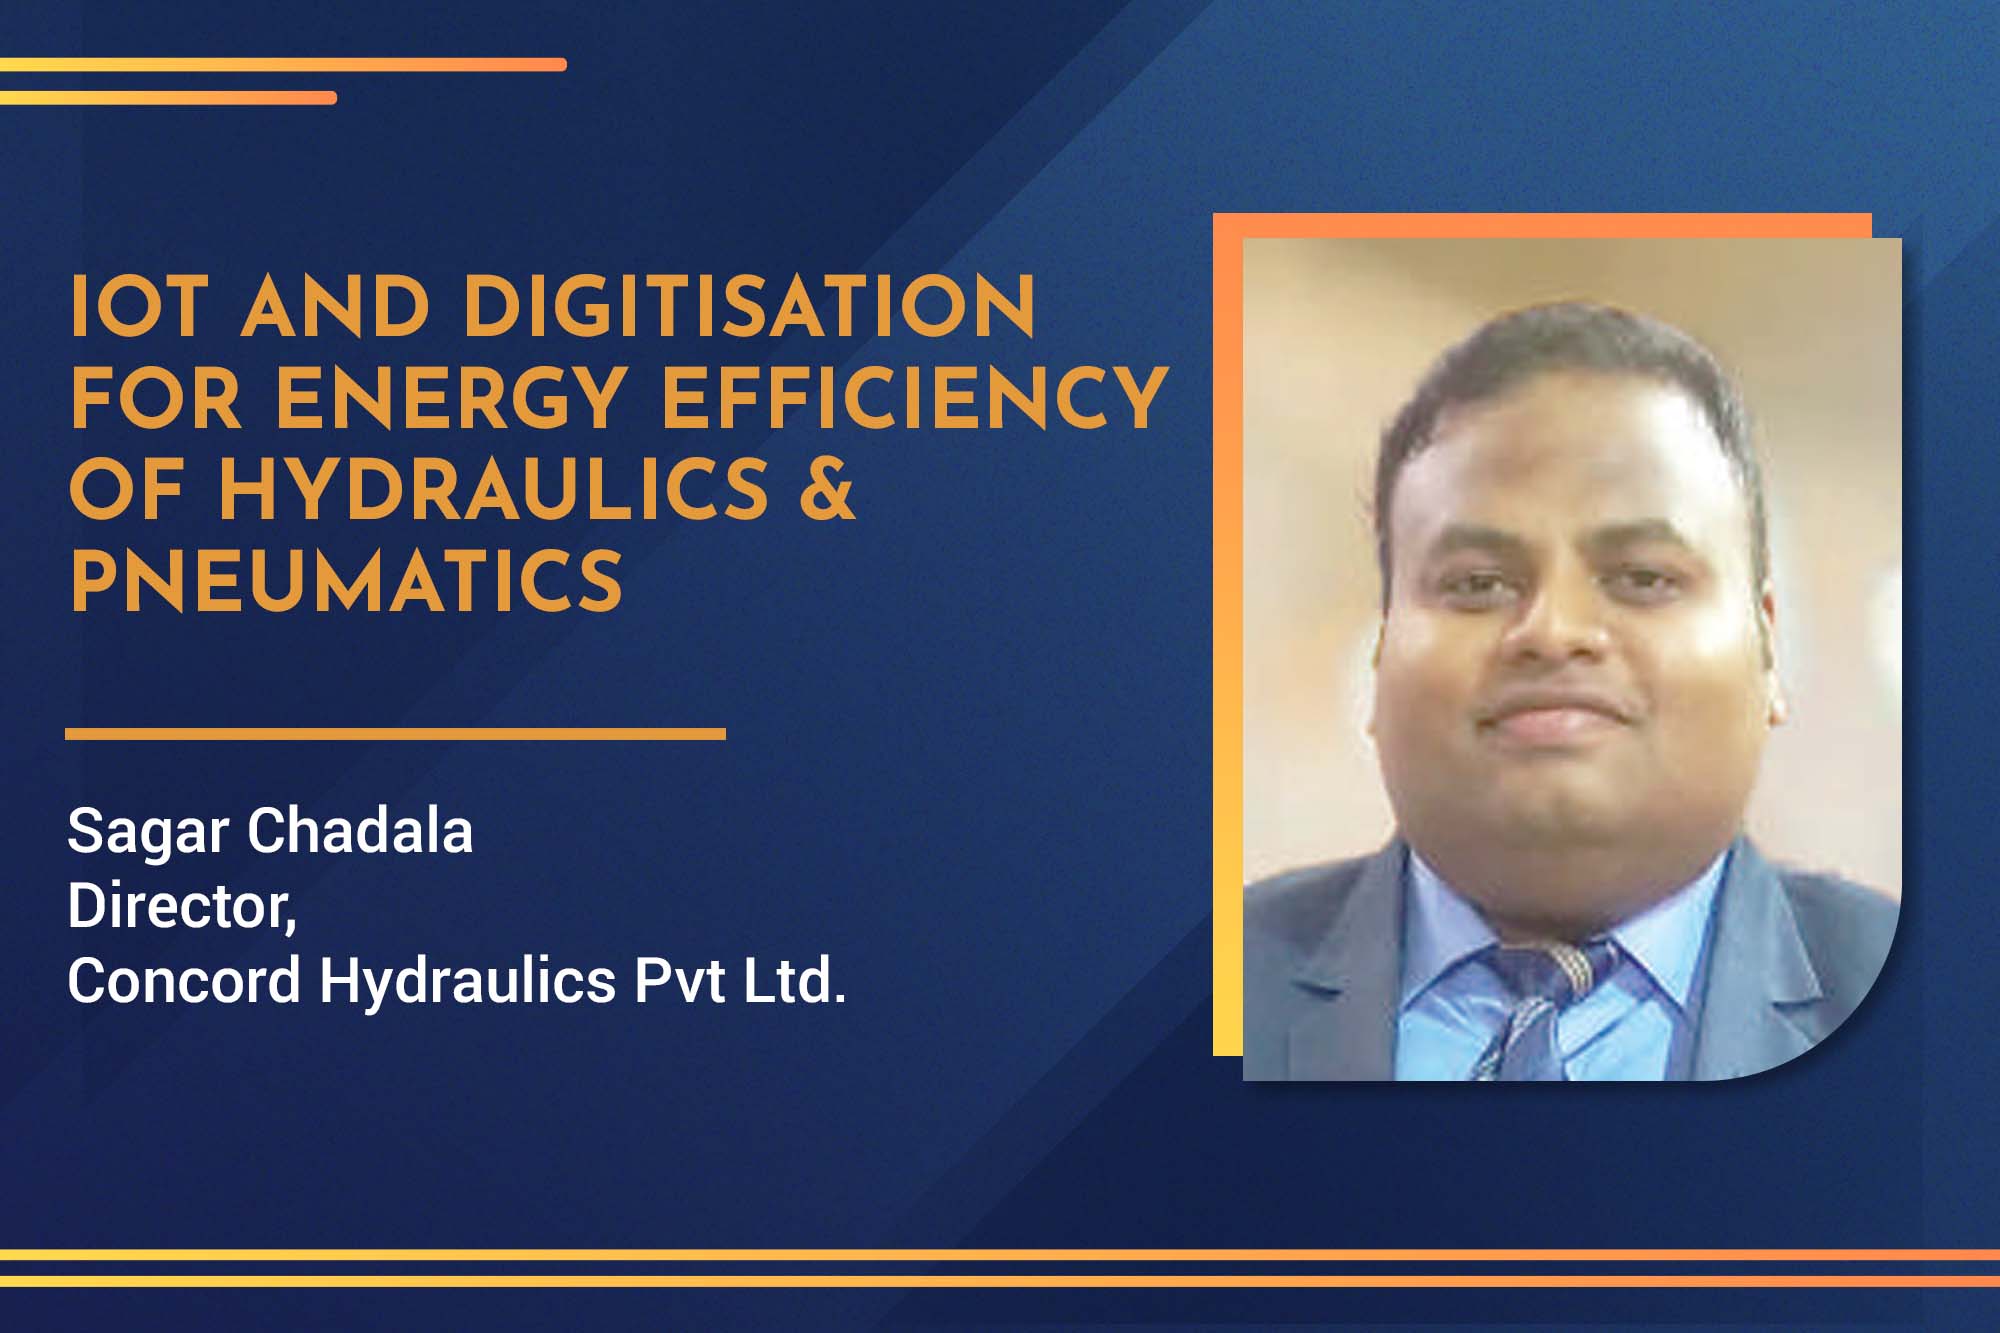 IoT and digitisation for energy efficiency of hydraulics & pneumatics